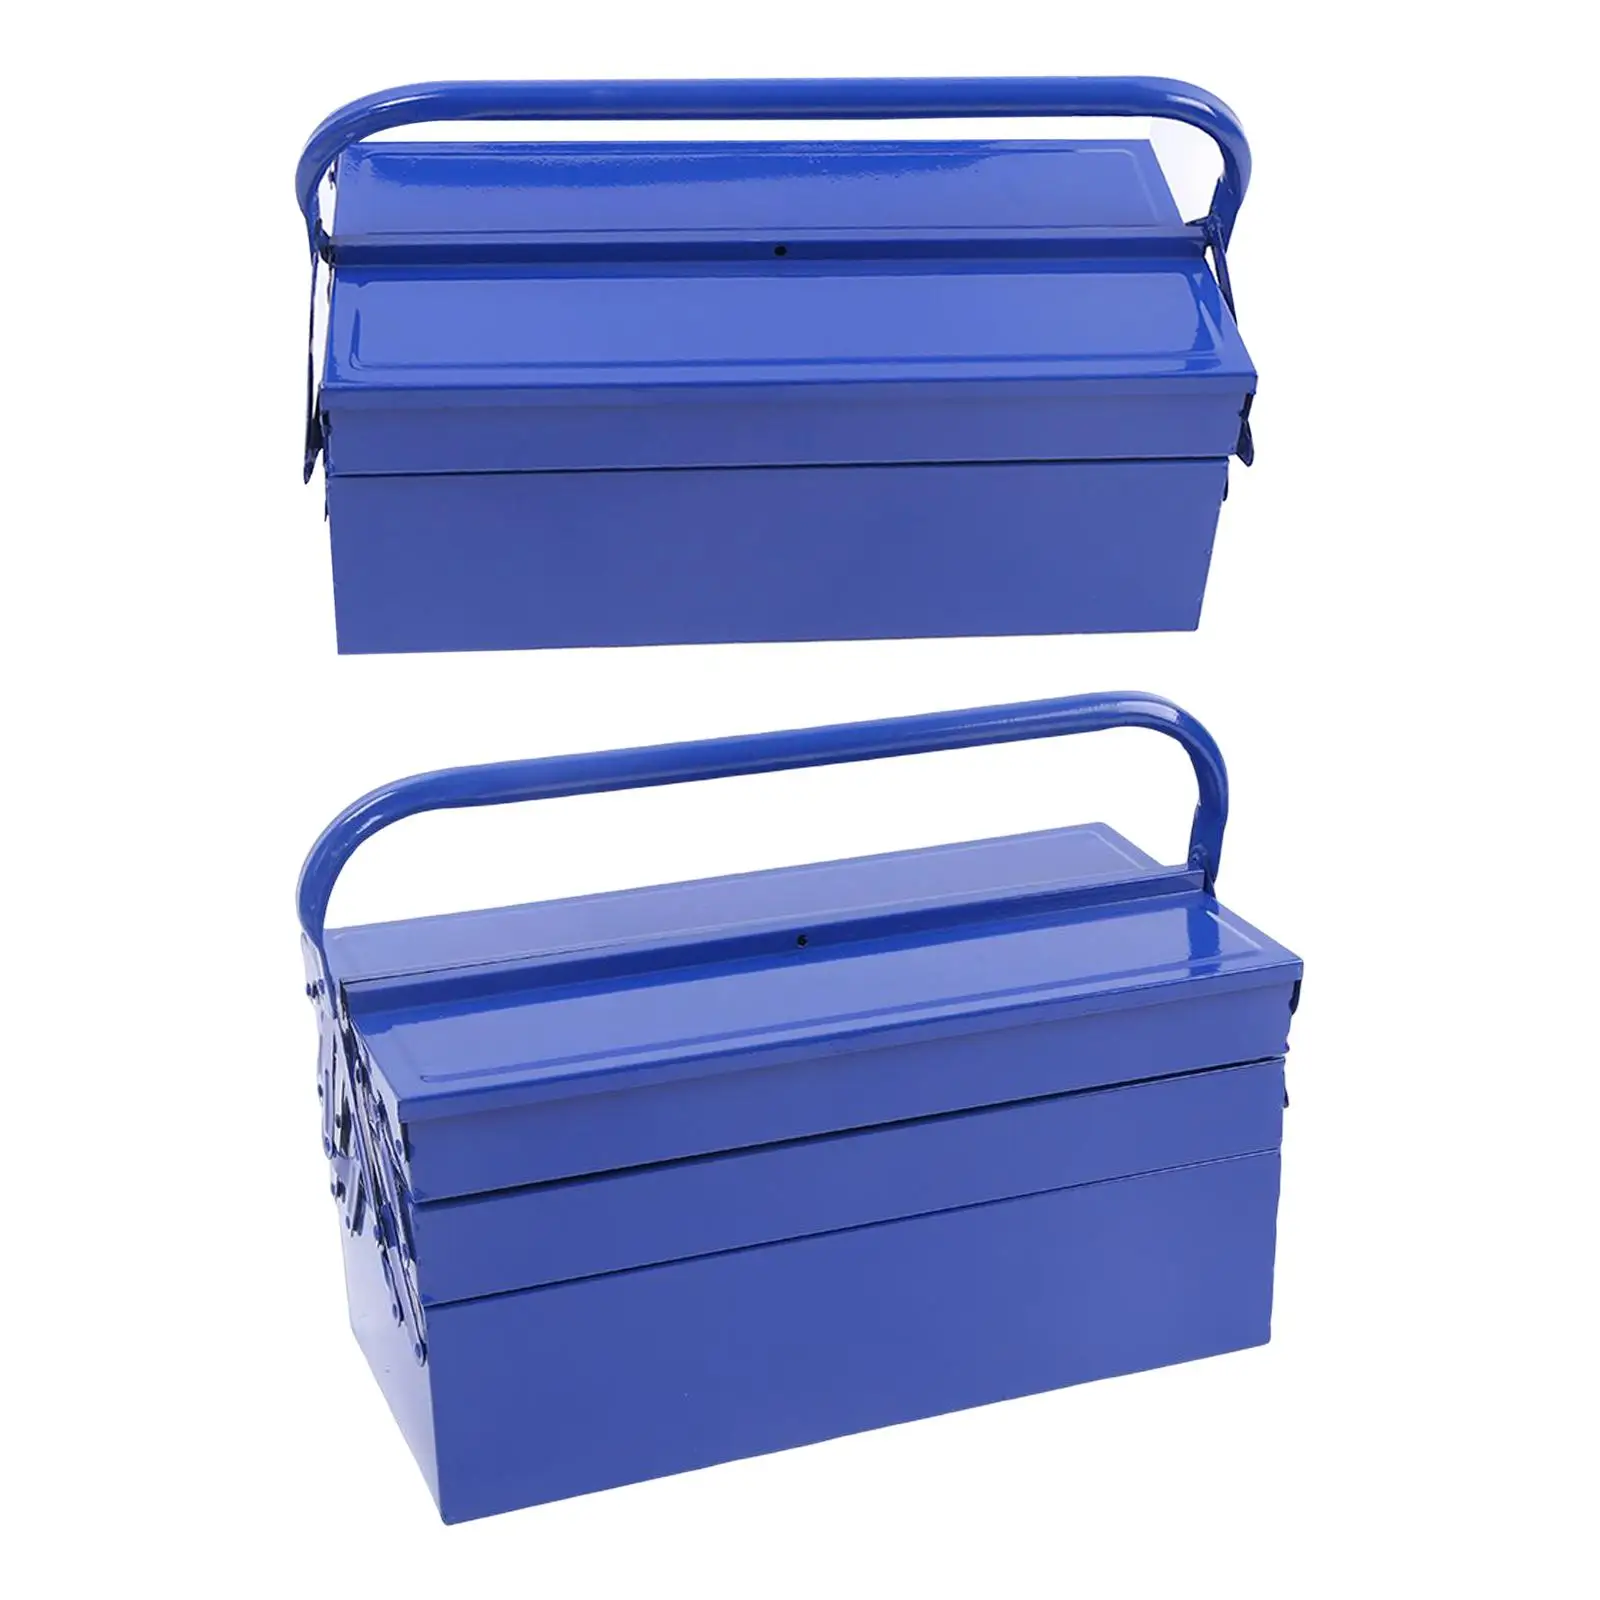 Tool Box with Handle Multifunction Repair Tool Storage Case Carrying Case Hardware Organizer for Household Car Warehouse Plumber